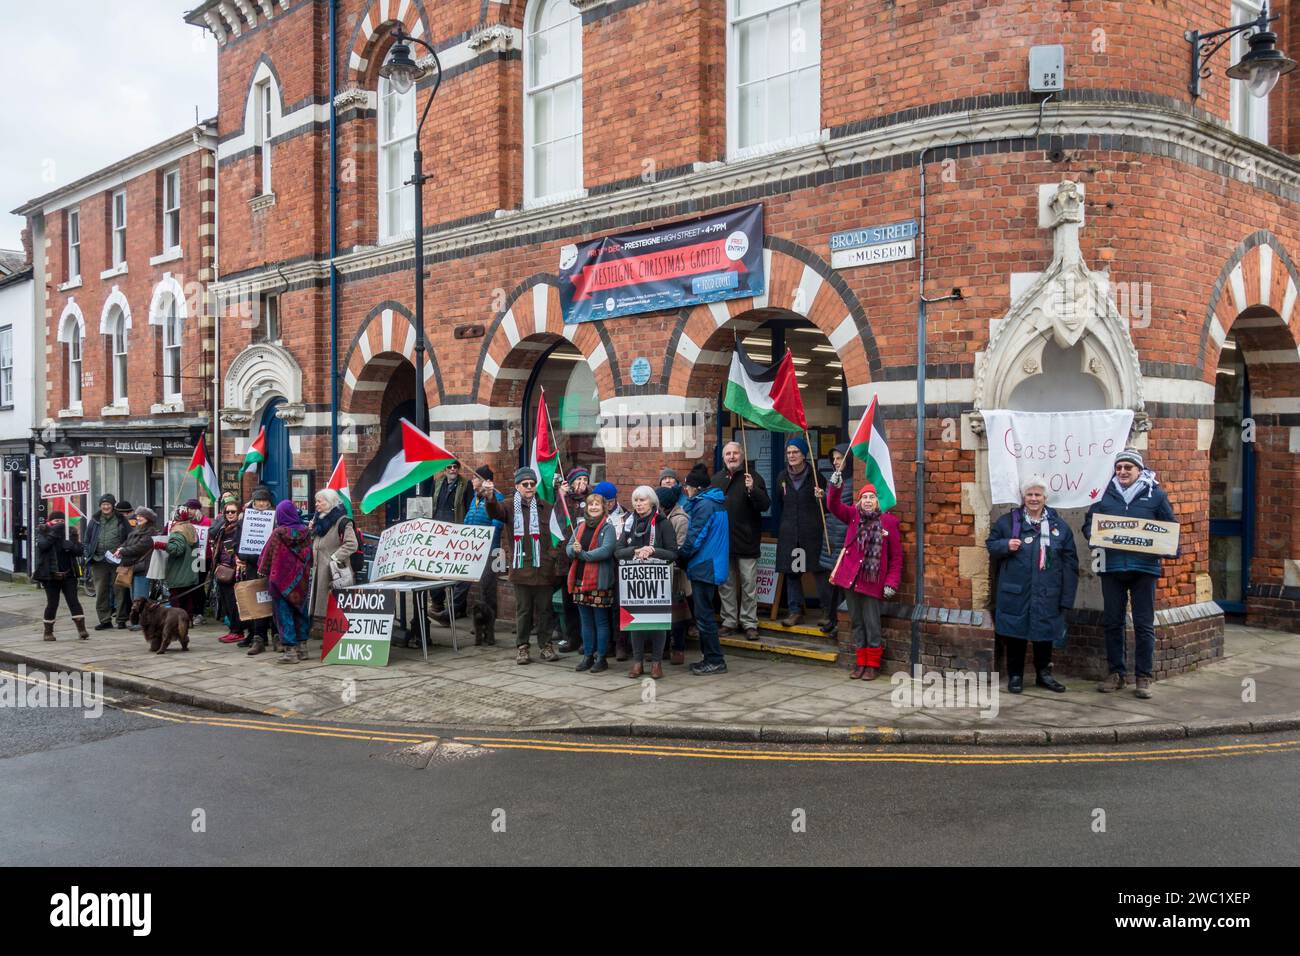 Residents of the small border town of Presteigne, Powys, Wales, UK, demonstrating against the Israeli military action in Gaza. These demonstrations have taken place regularly every Saturday, organised by the local group Radnor Palestine Links. Stock Photo